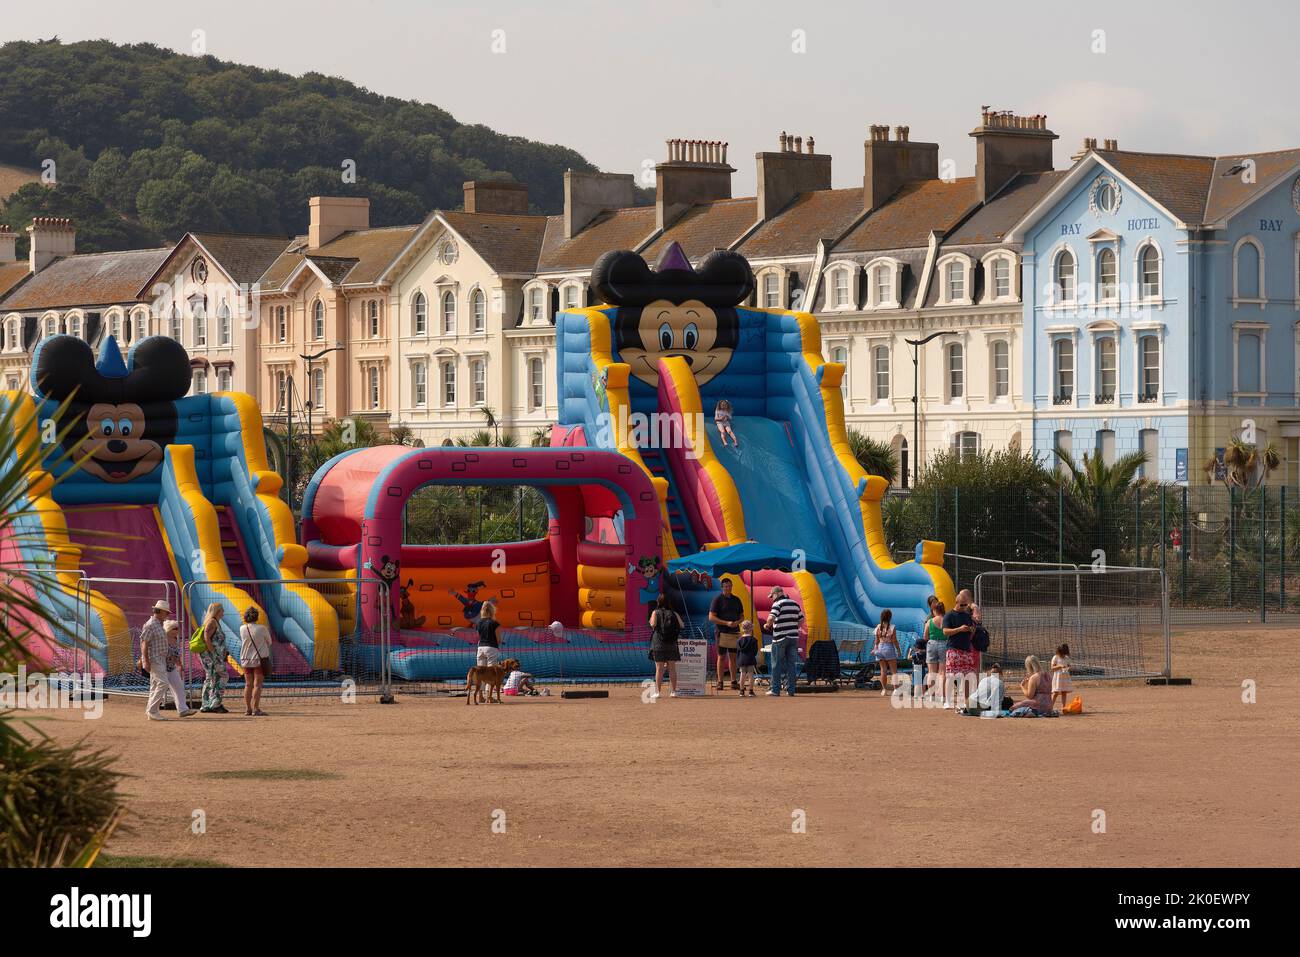 Teignmouth, Devon, England, UK. 2022. Seafront housing and childrens play area on dried grass during heatwave at Teignmouth a popular seaside resort. Stock Photo